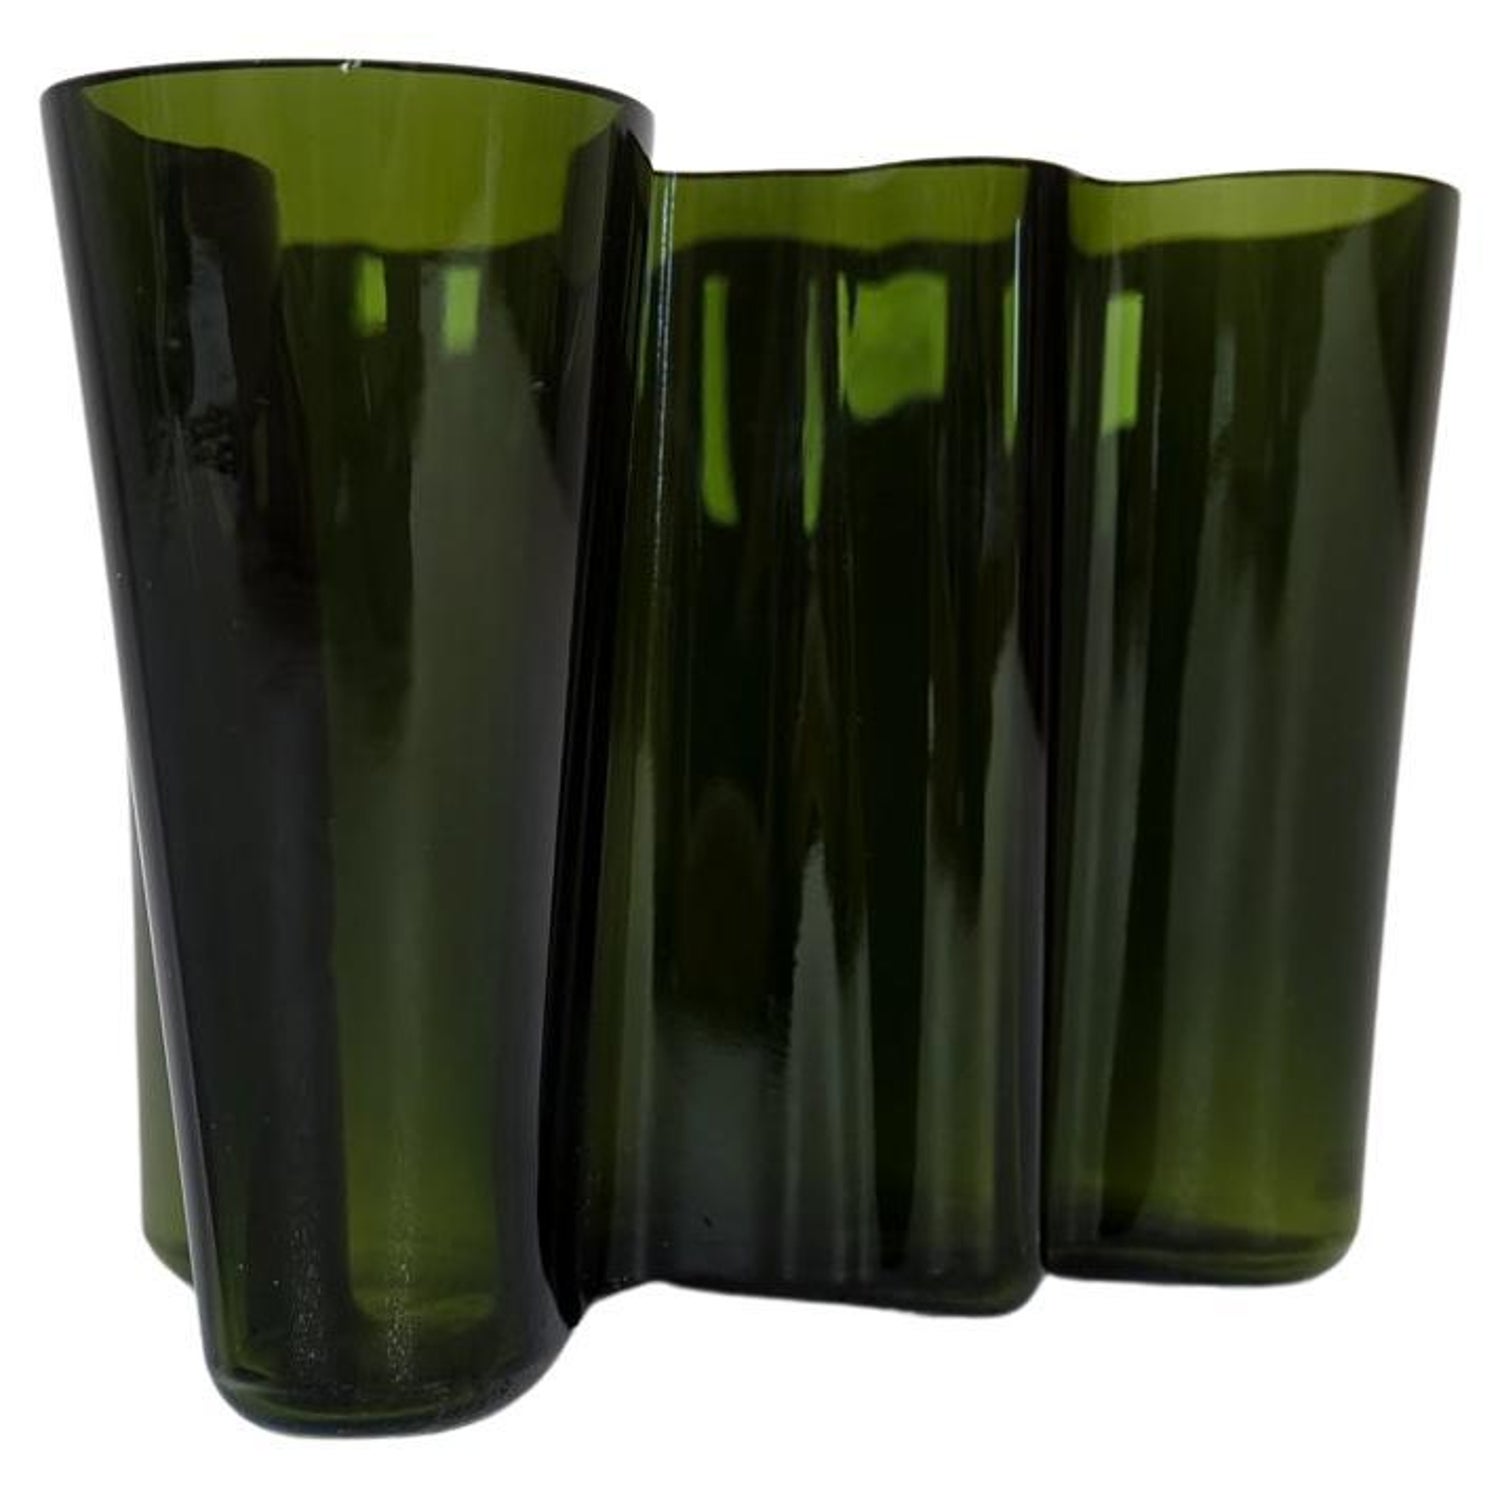 Alvar Aalto Vases and Vessels - 22 For Sale at 1stDibs | aalto glass, aalto  glass vase, aalto savoy vase